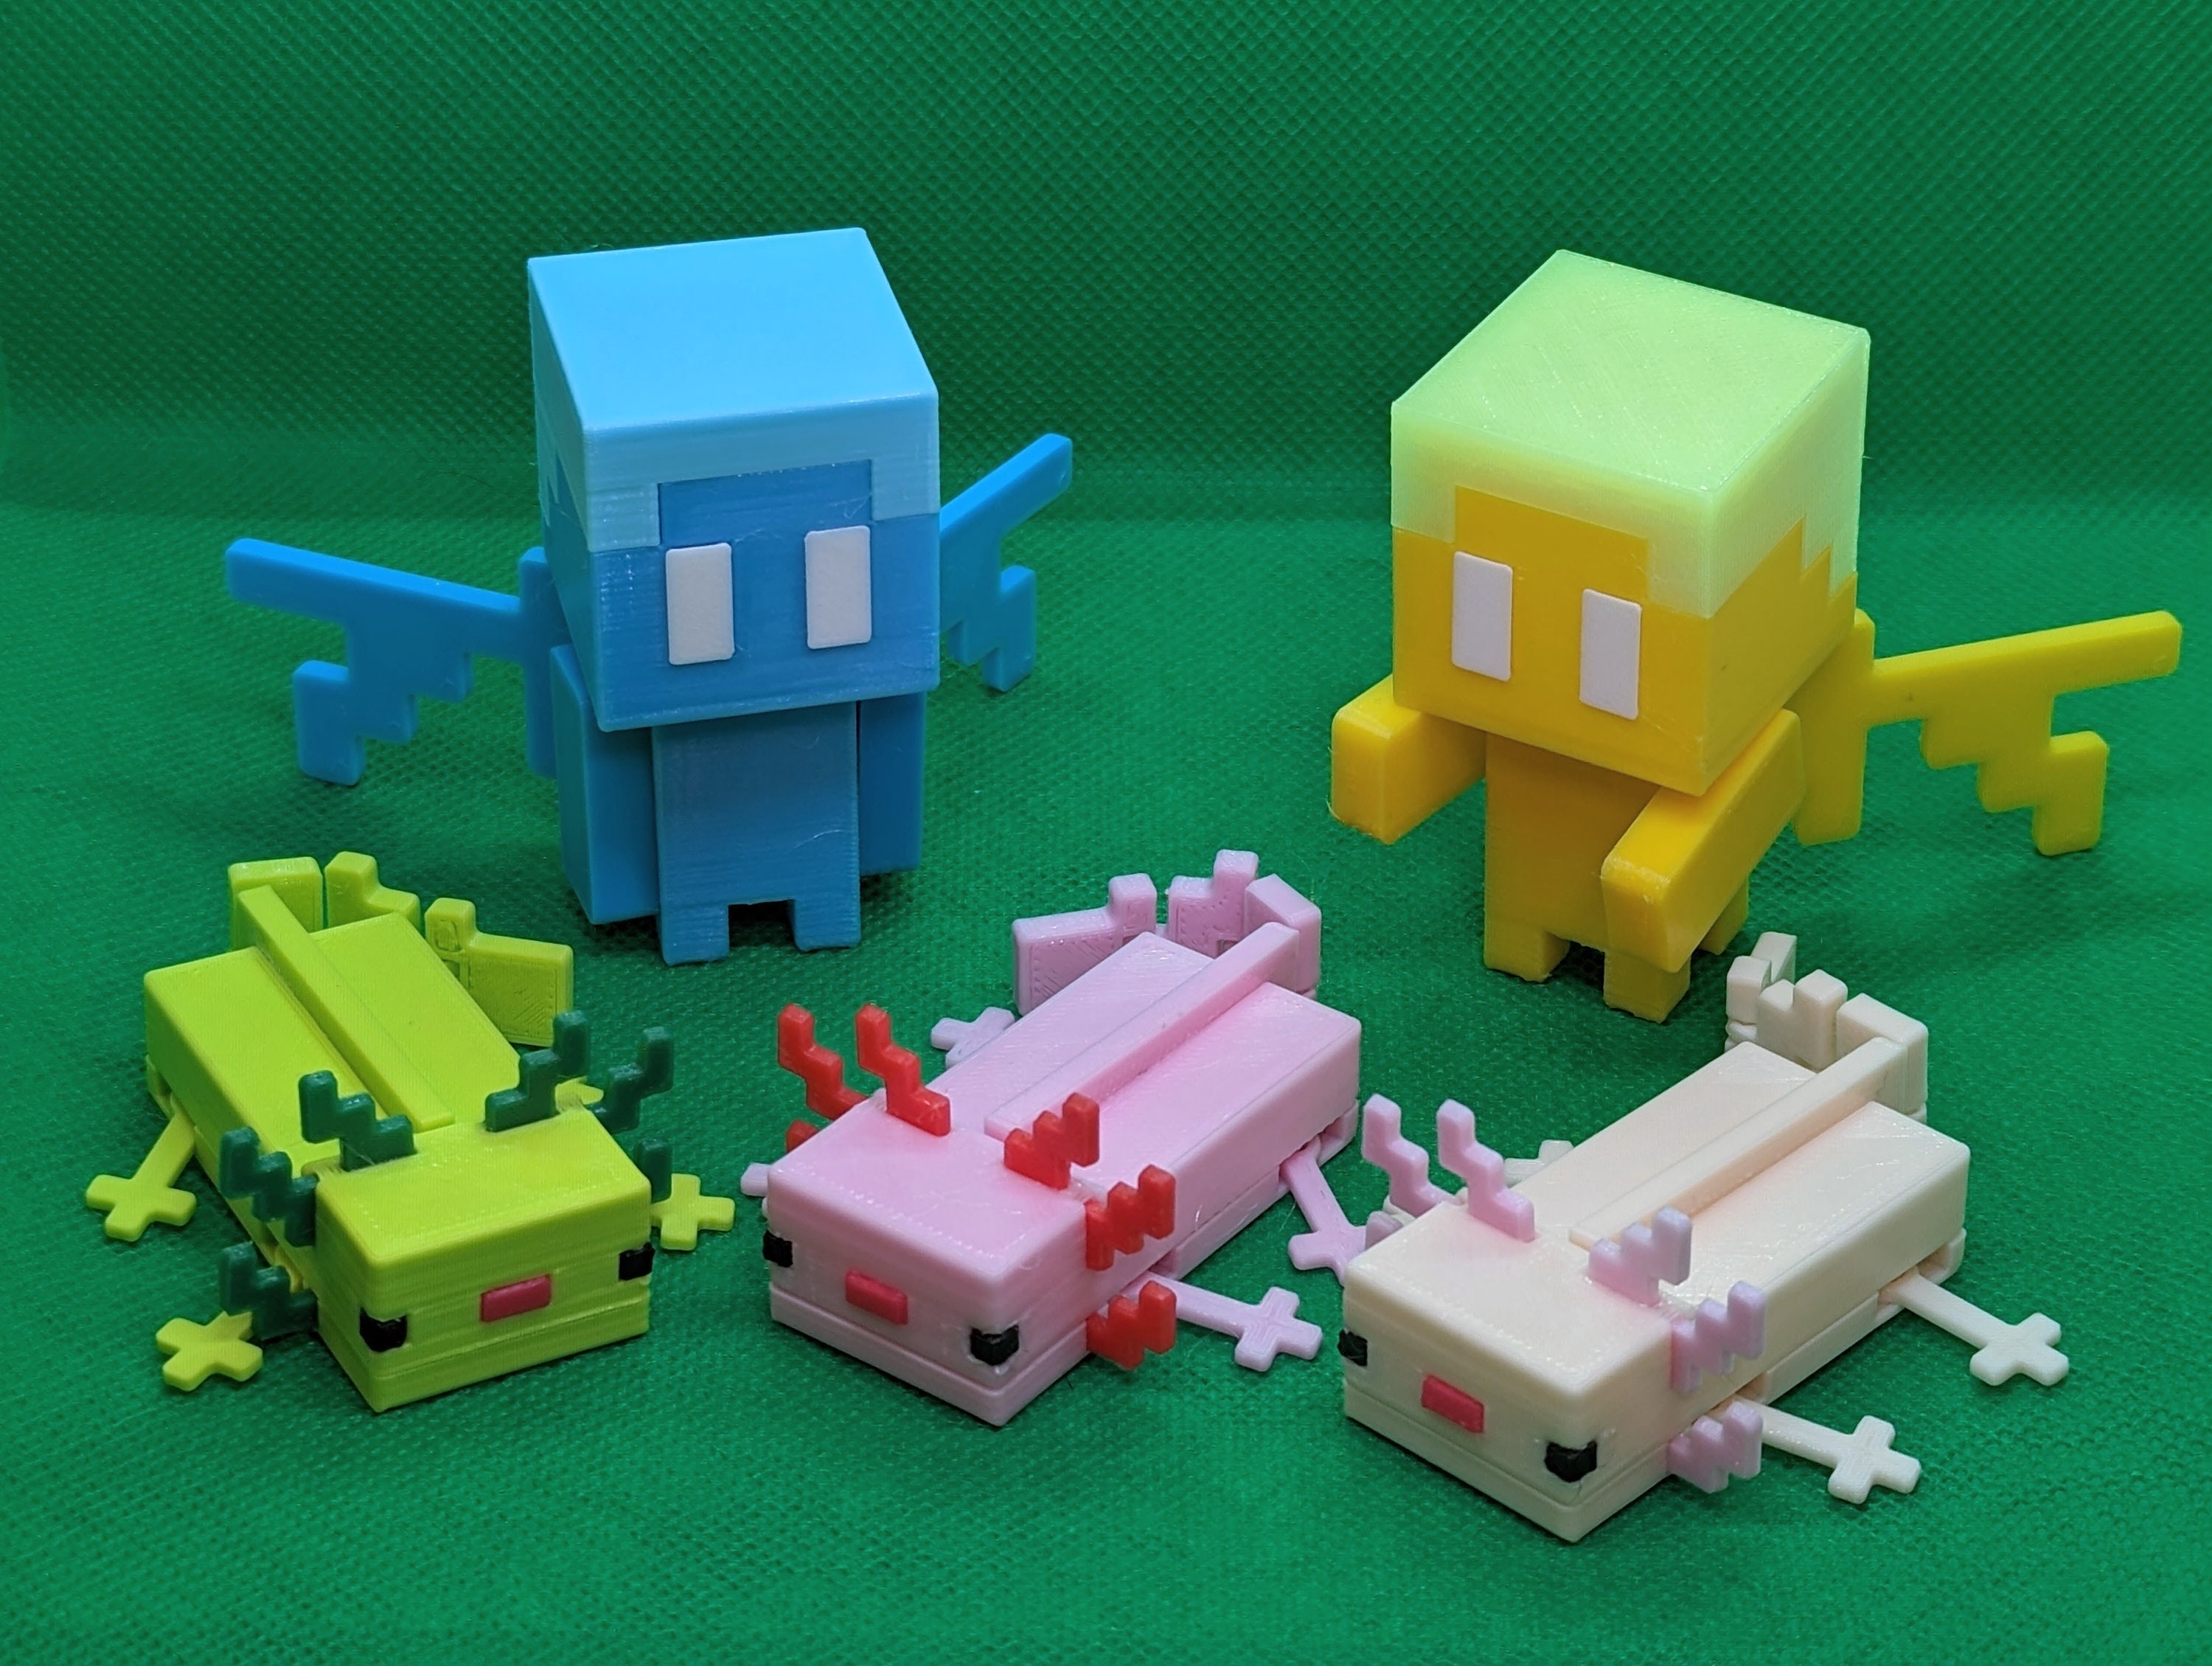 Minecraft Baby Axolotl Mini Toy 3.5 Inch Long, Moveable Legs and